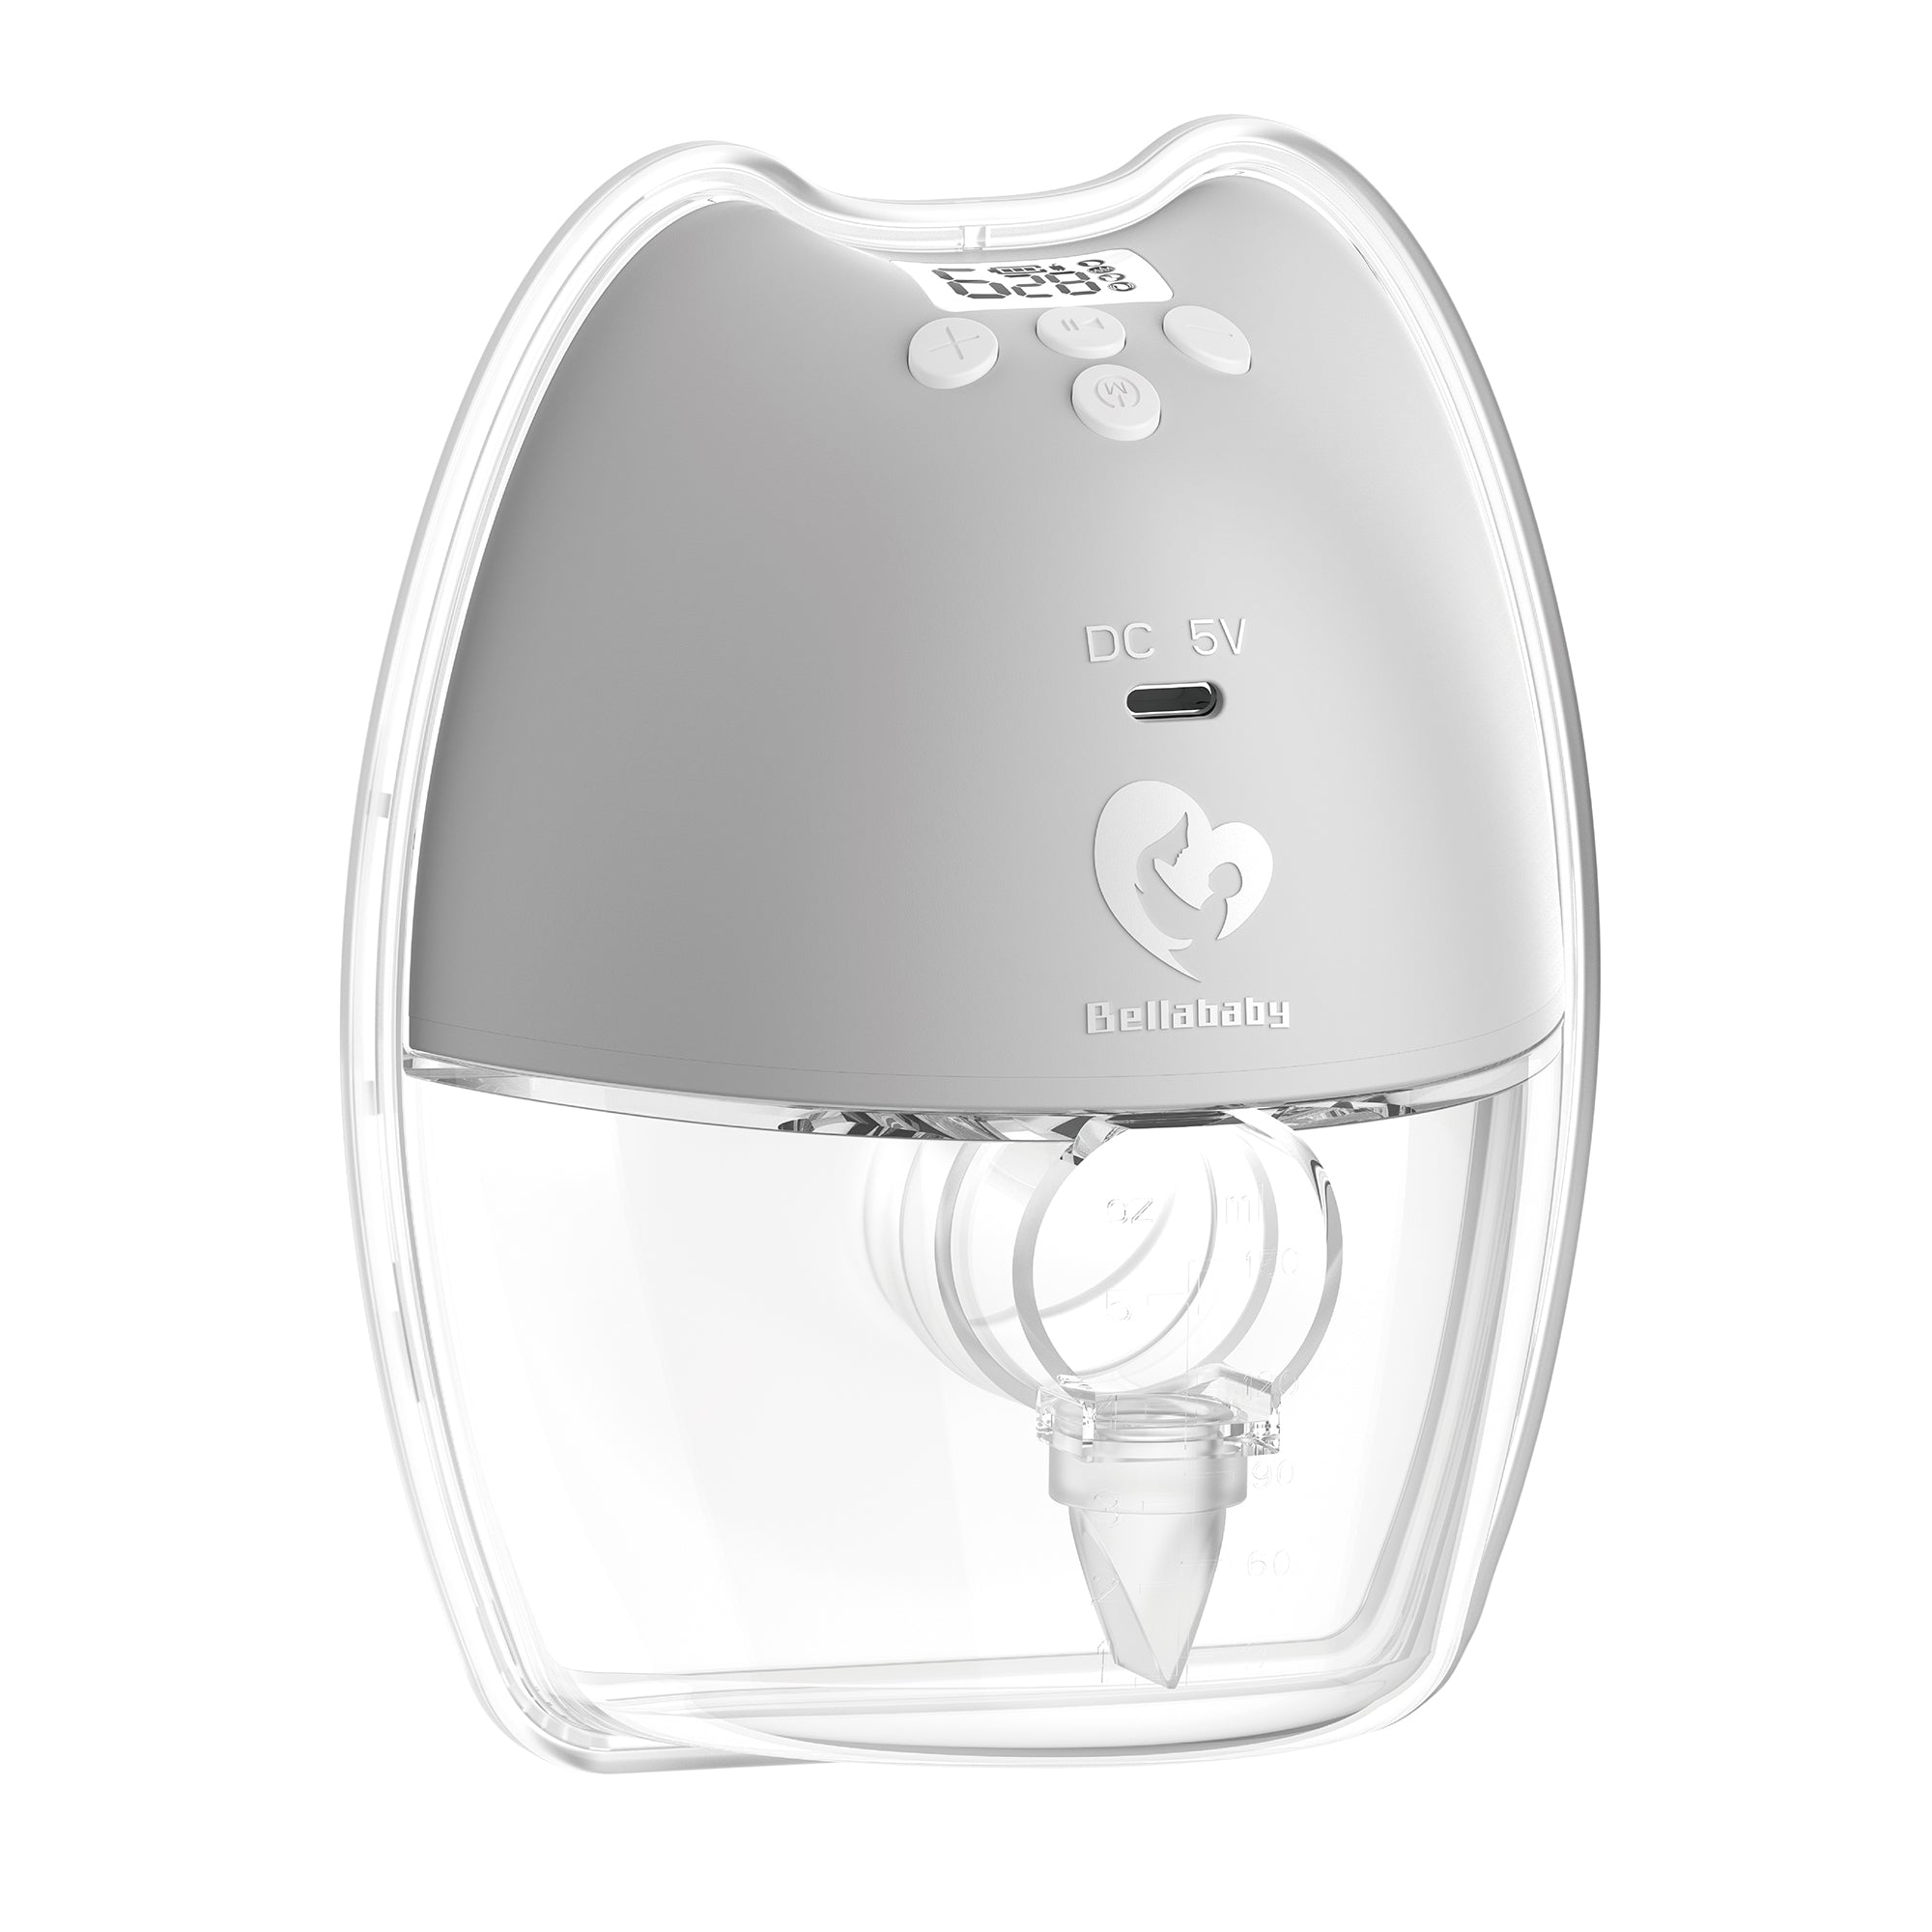 Bellababy Duo Rechargeable Electric Breast Pump BLA8015-02 New